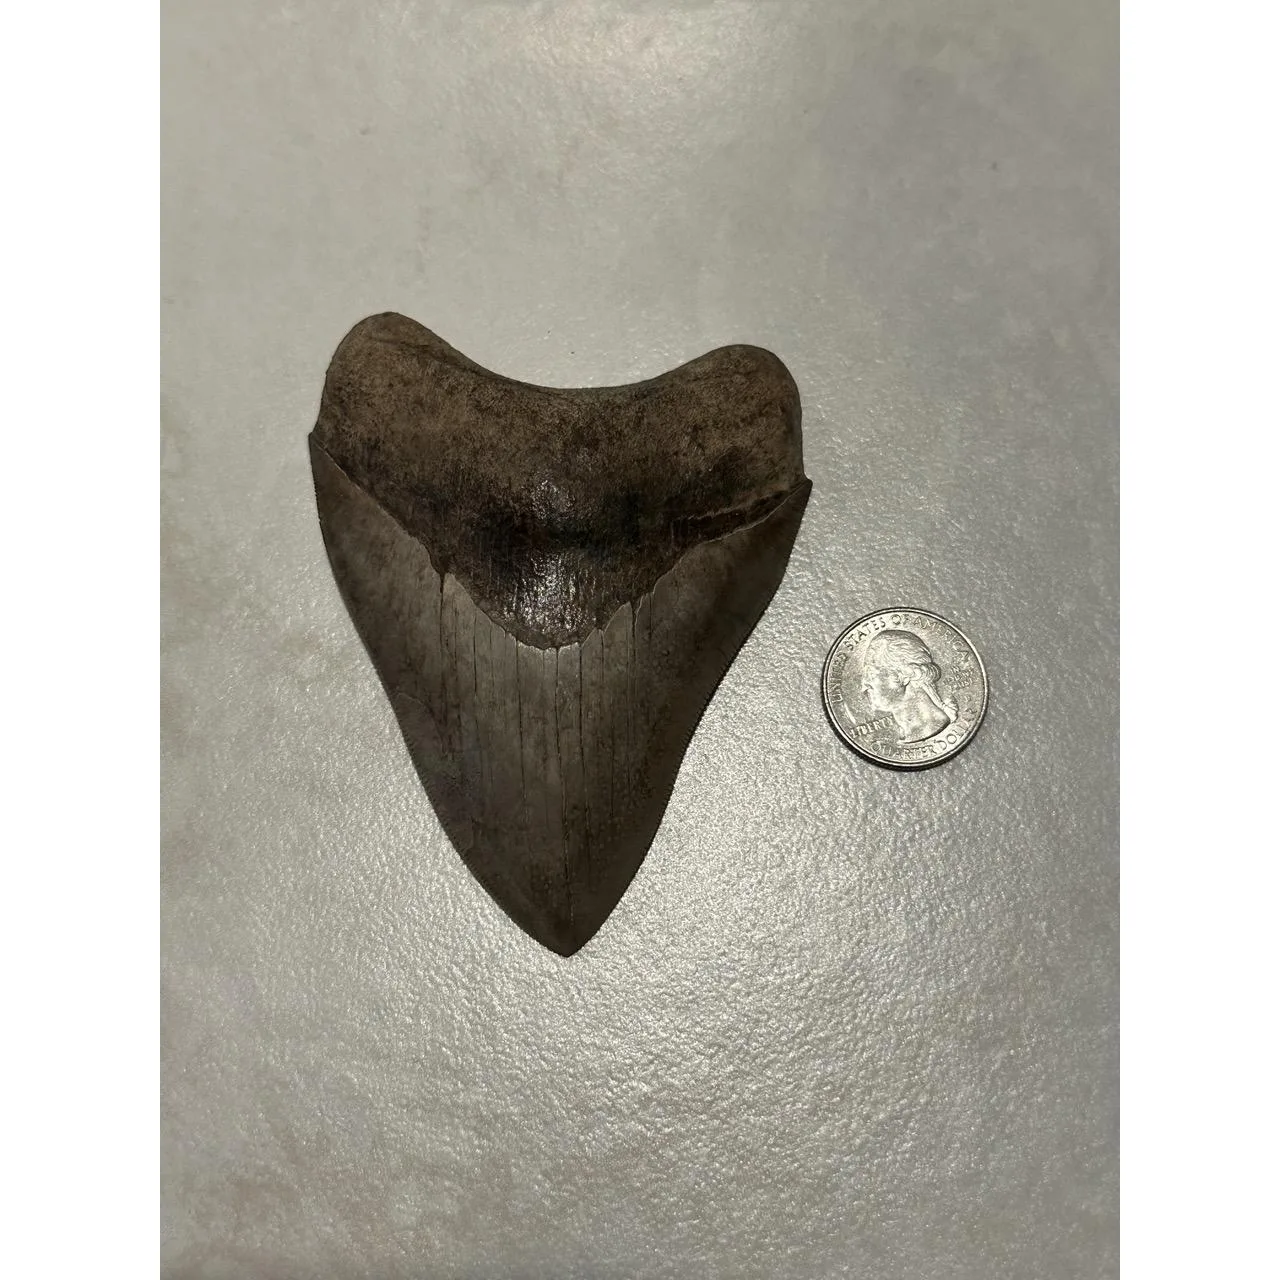 Megalodon Tooth, S. Georgia 4.00 inch Prehistoric Online